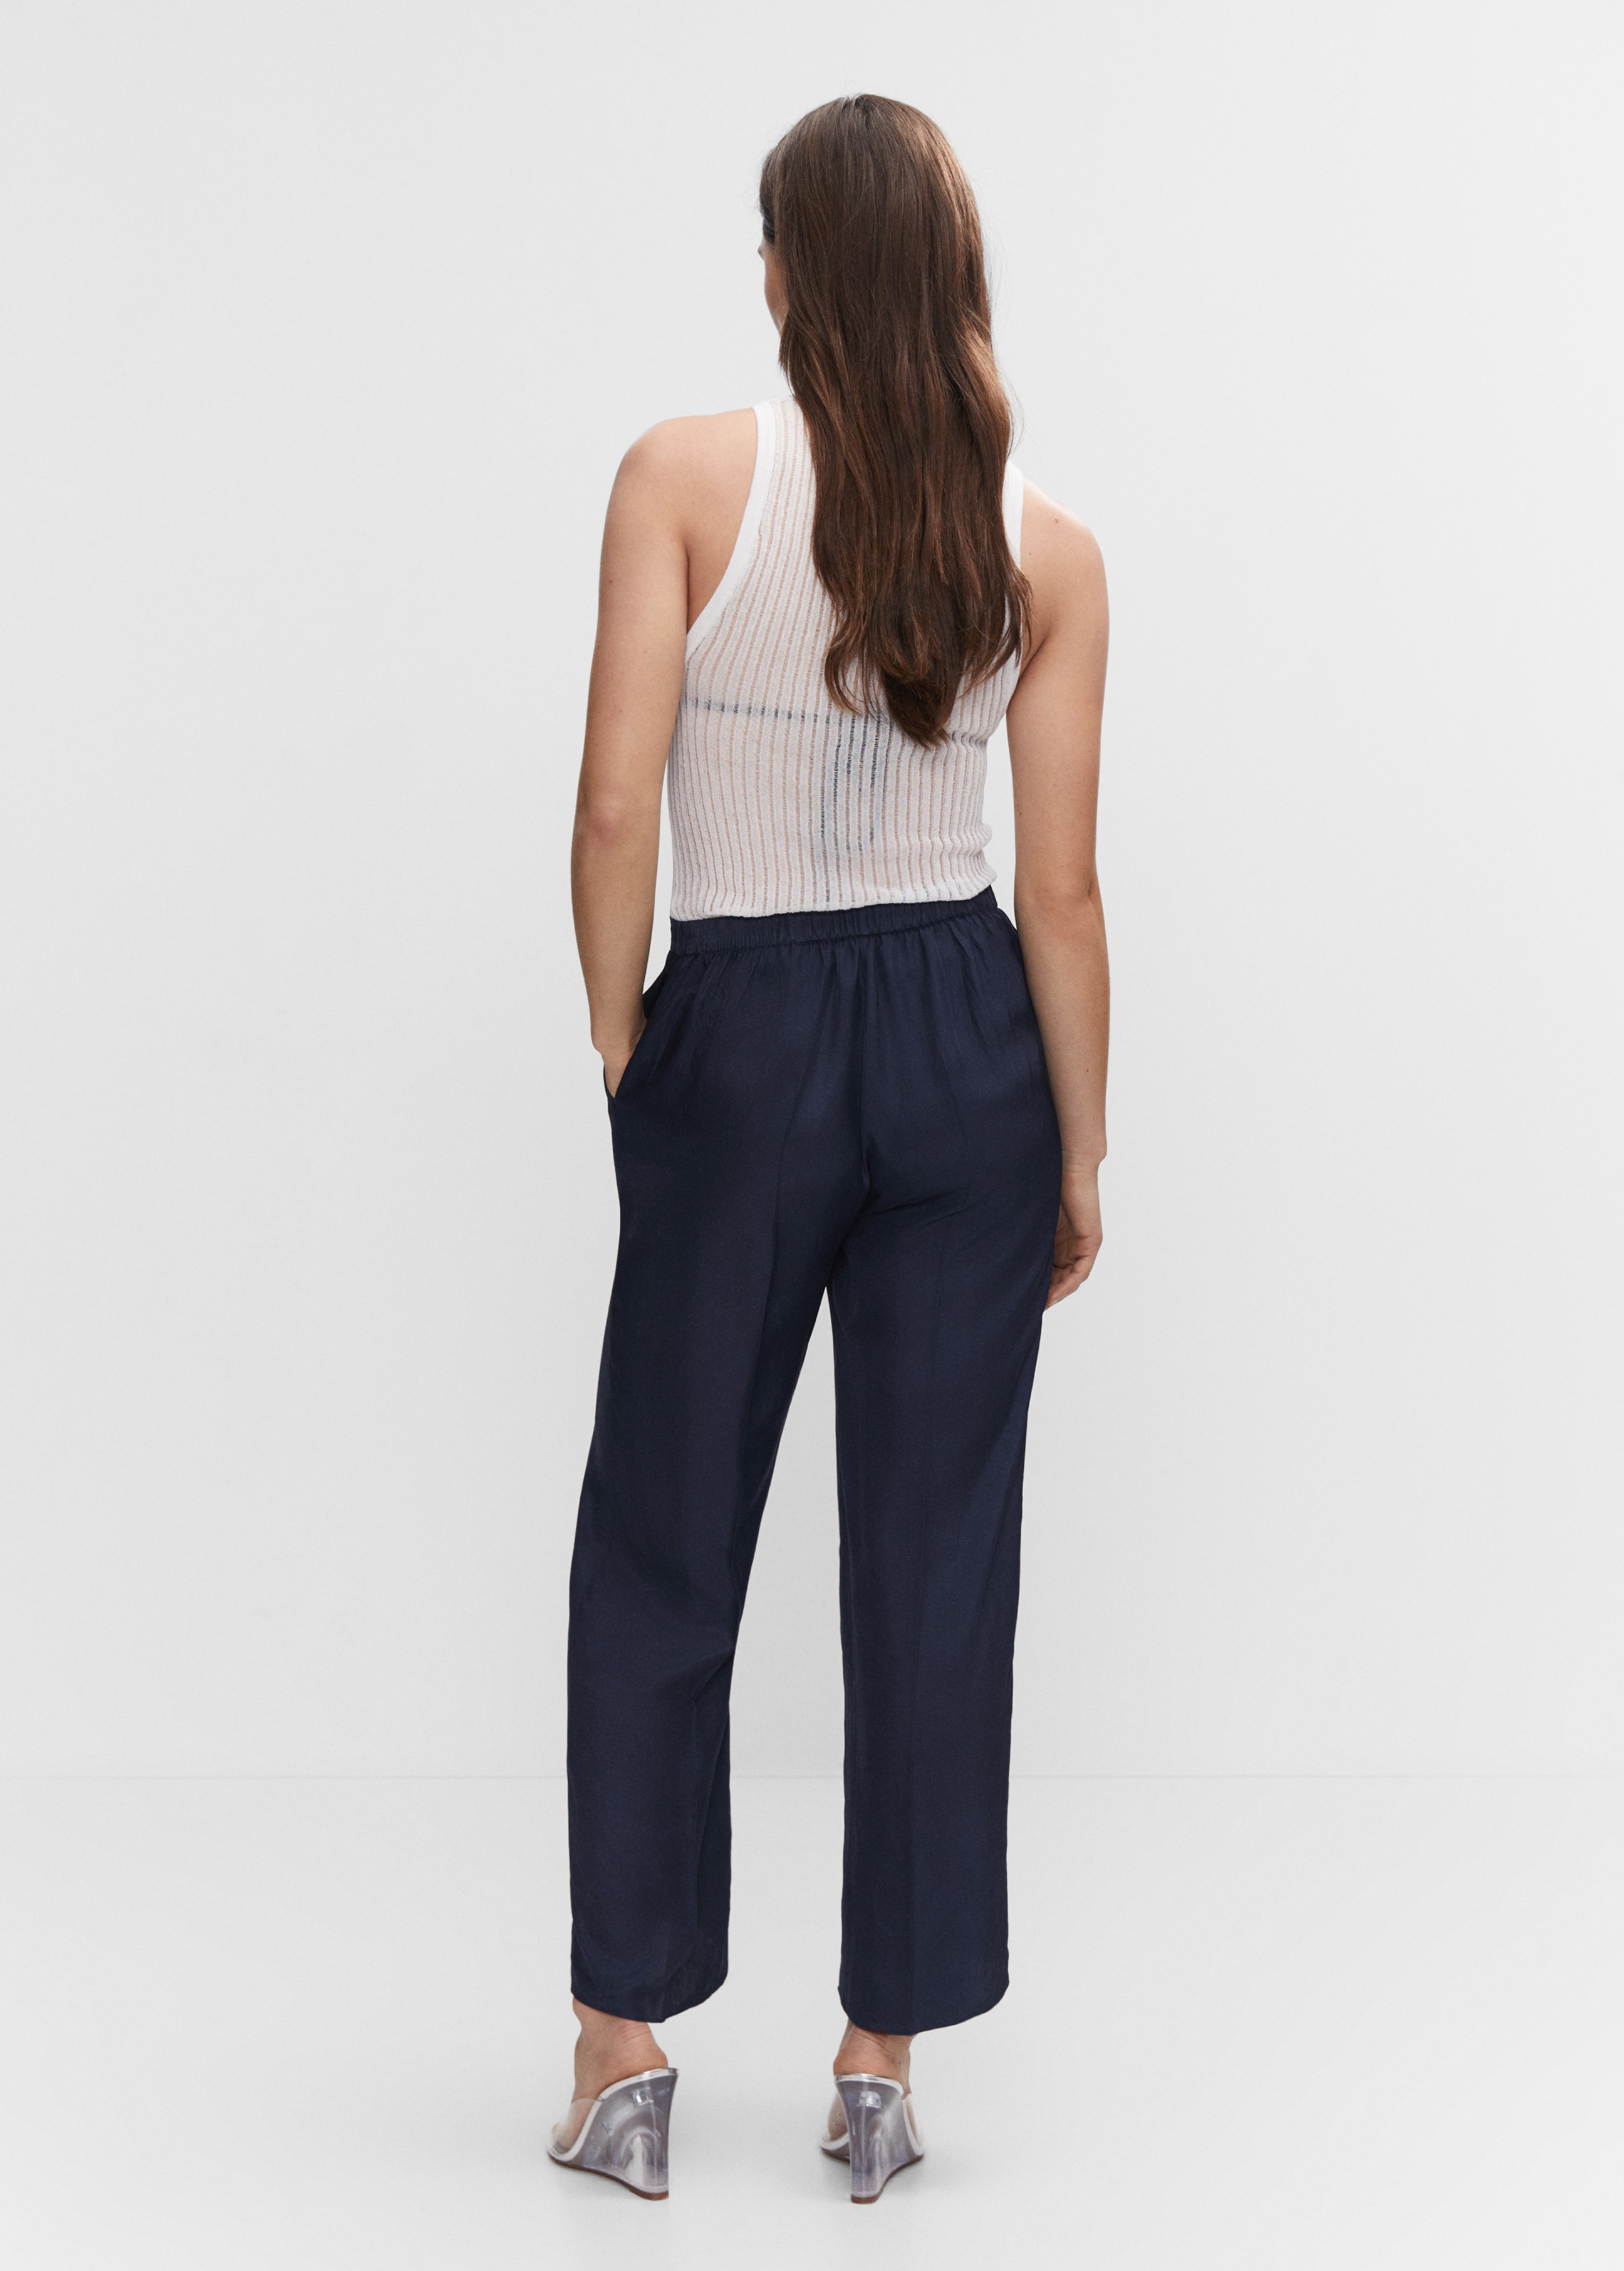 Bow culottes trousers - Reverse of the article